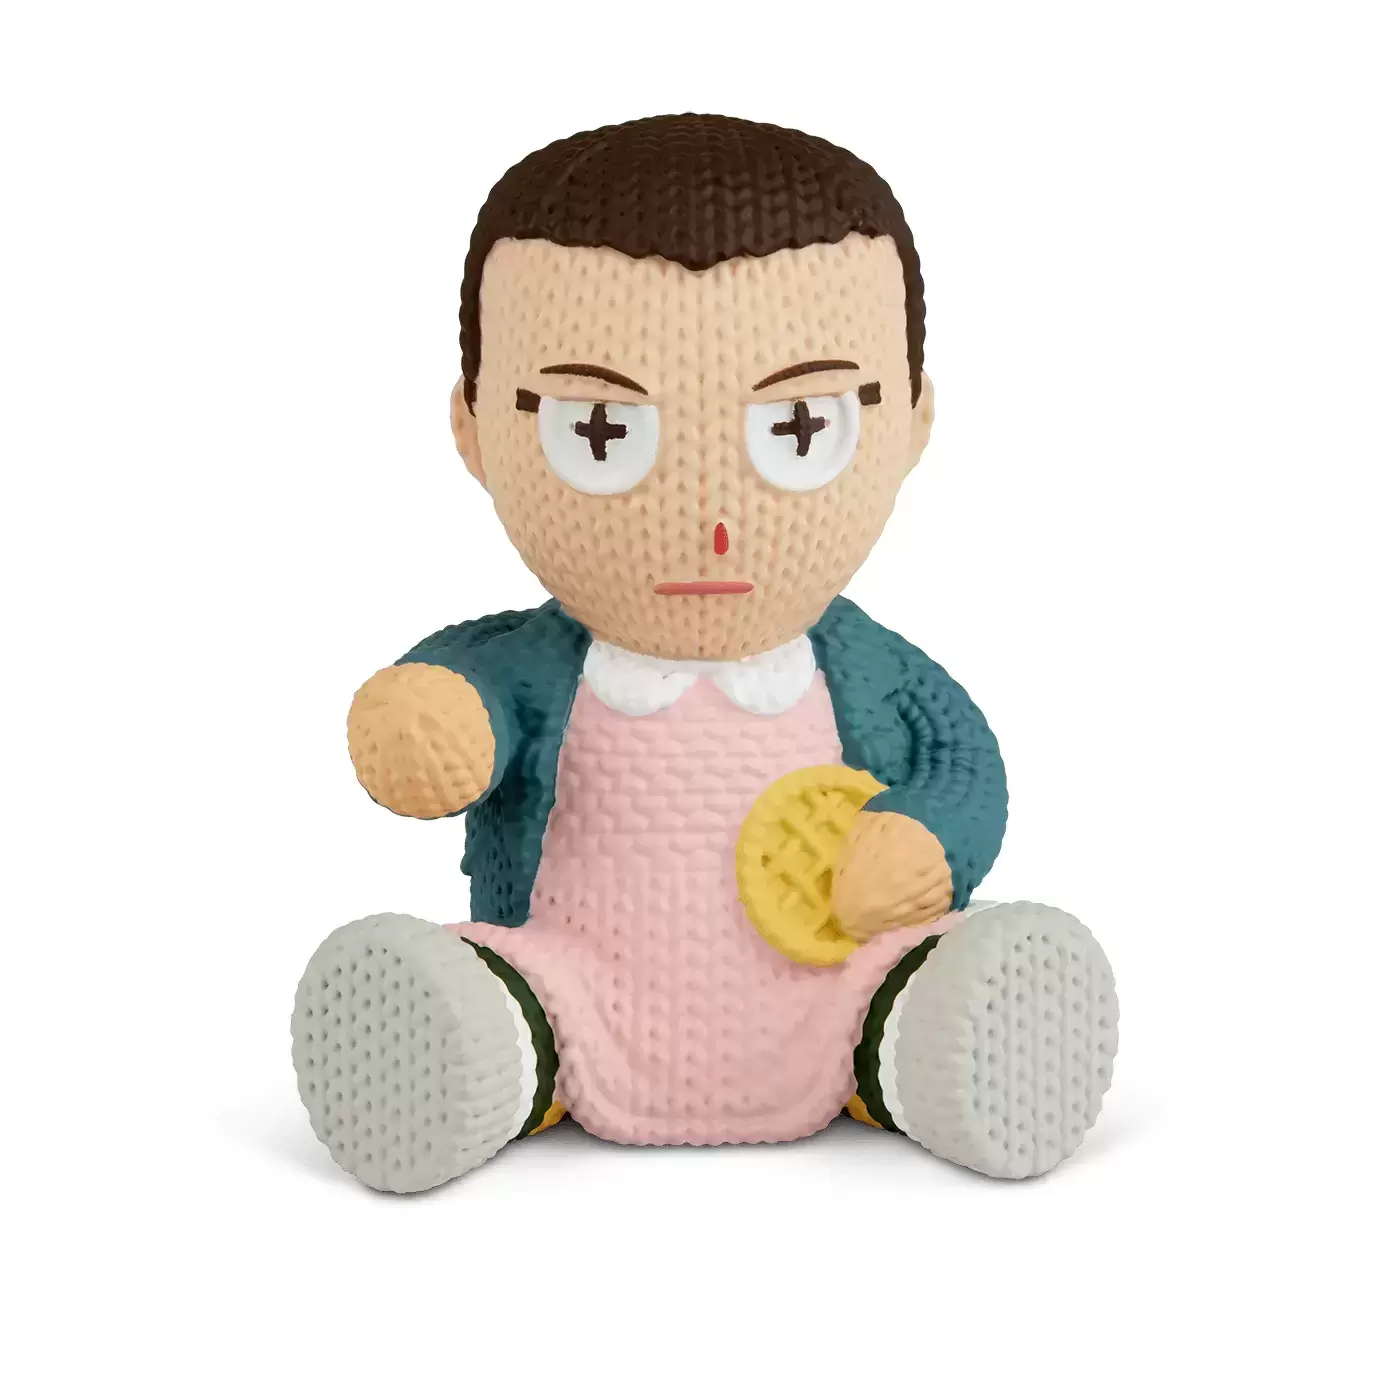 Handmade By Robots - Stranger Things - Eleven